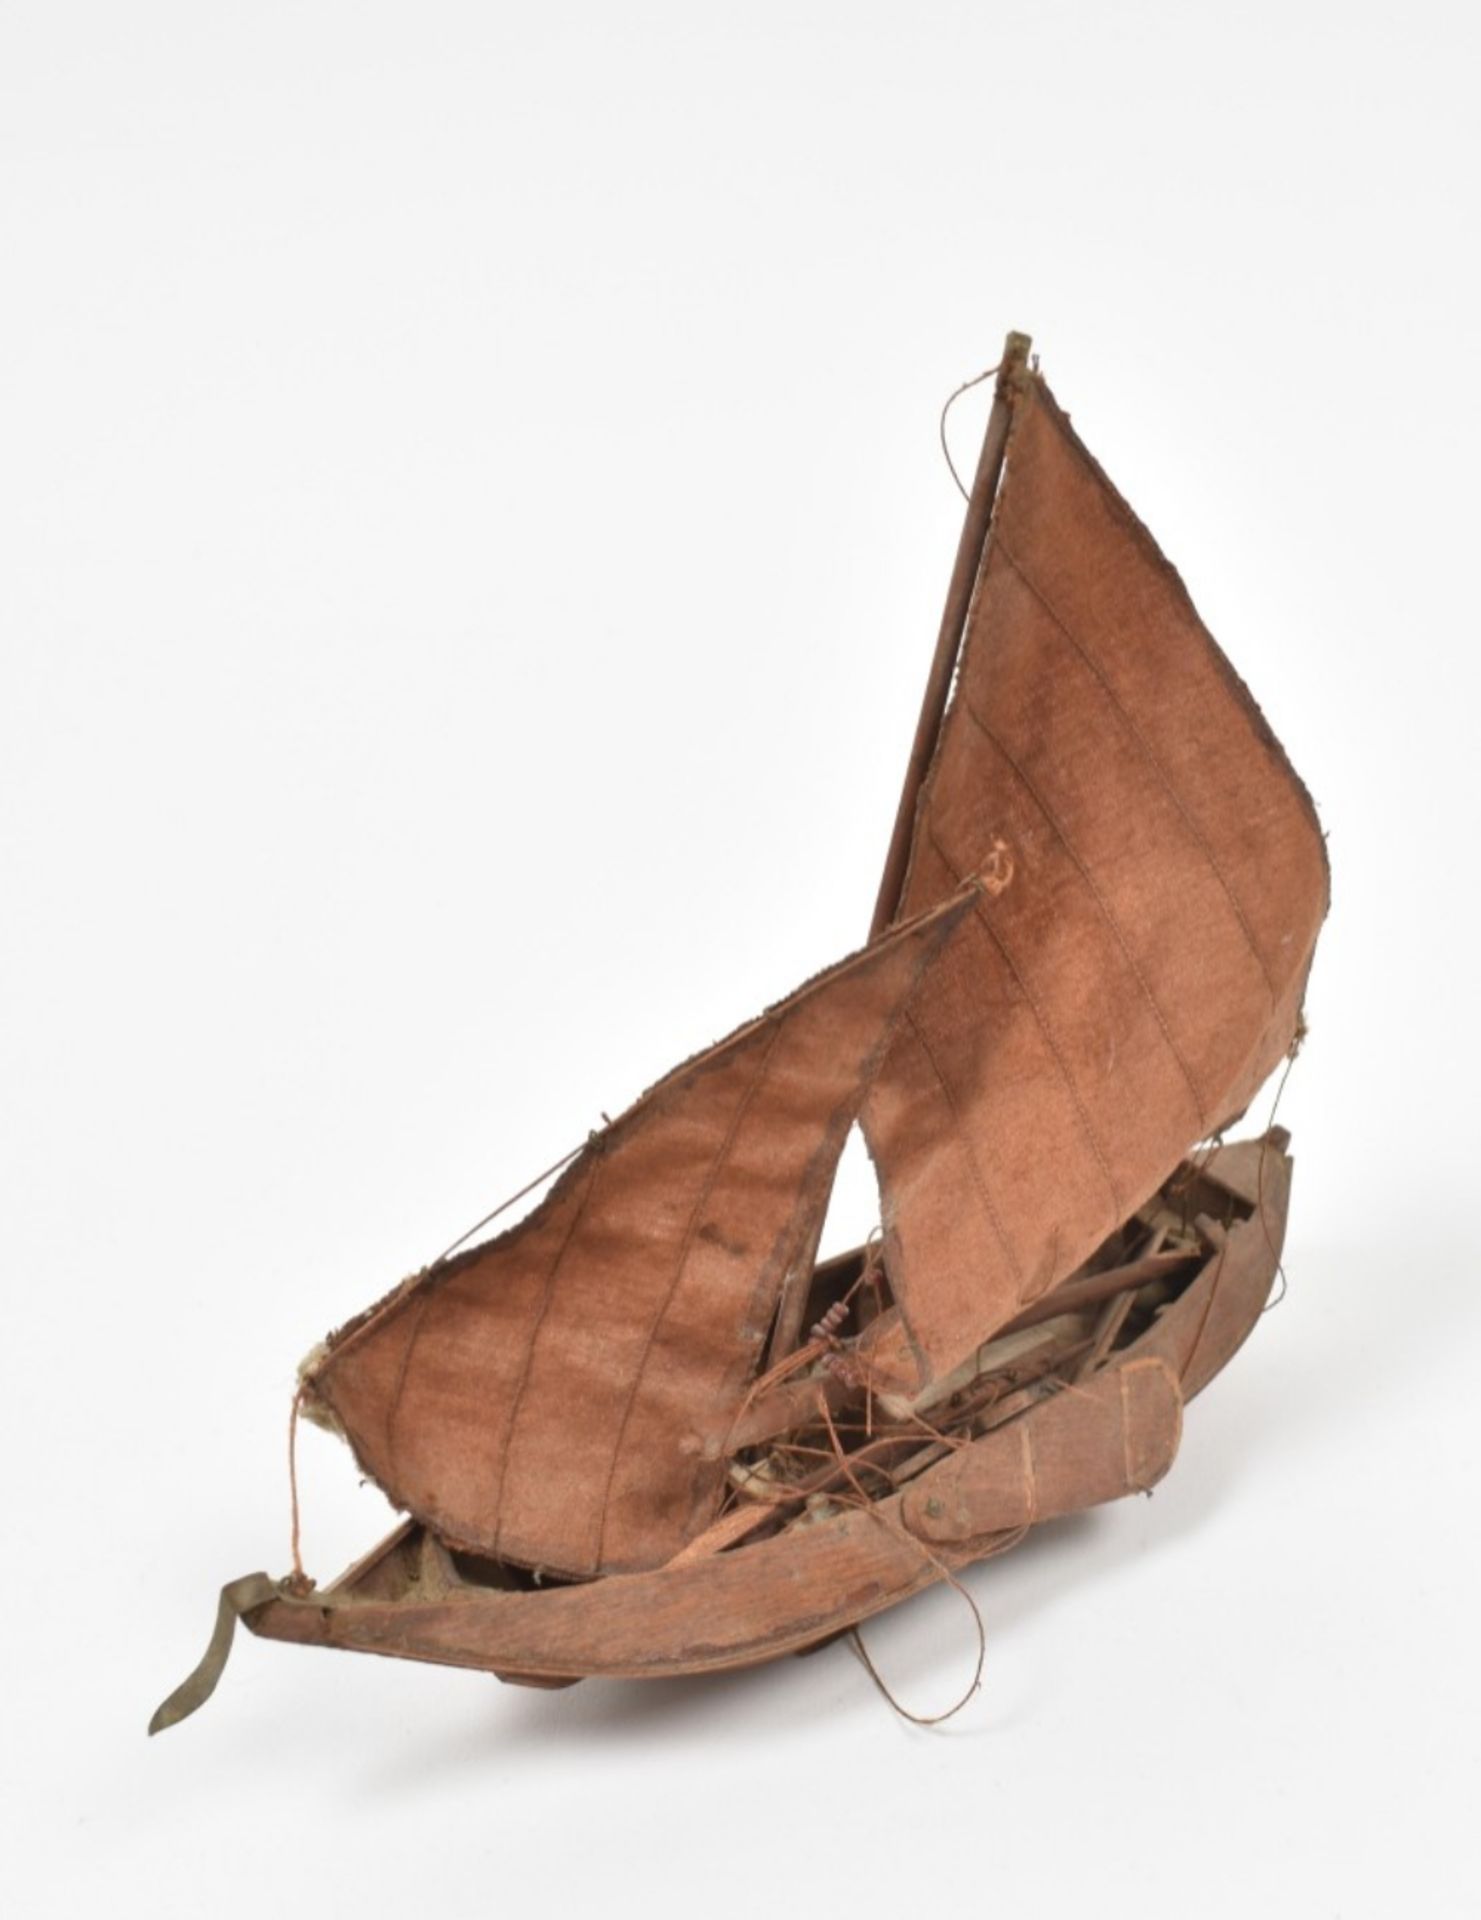 Historic model of a canoe - Image 3 of 9